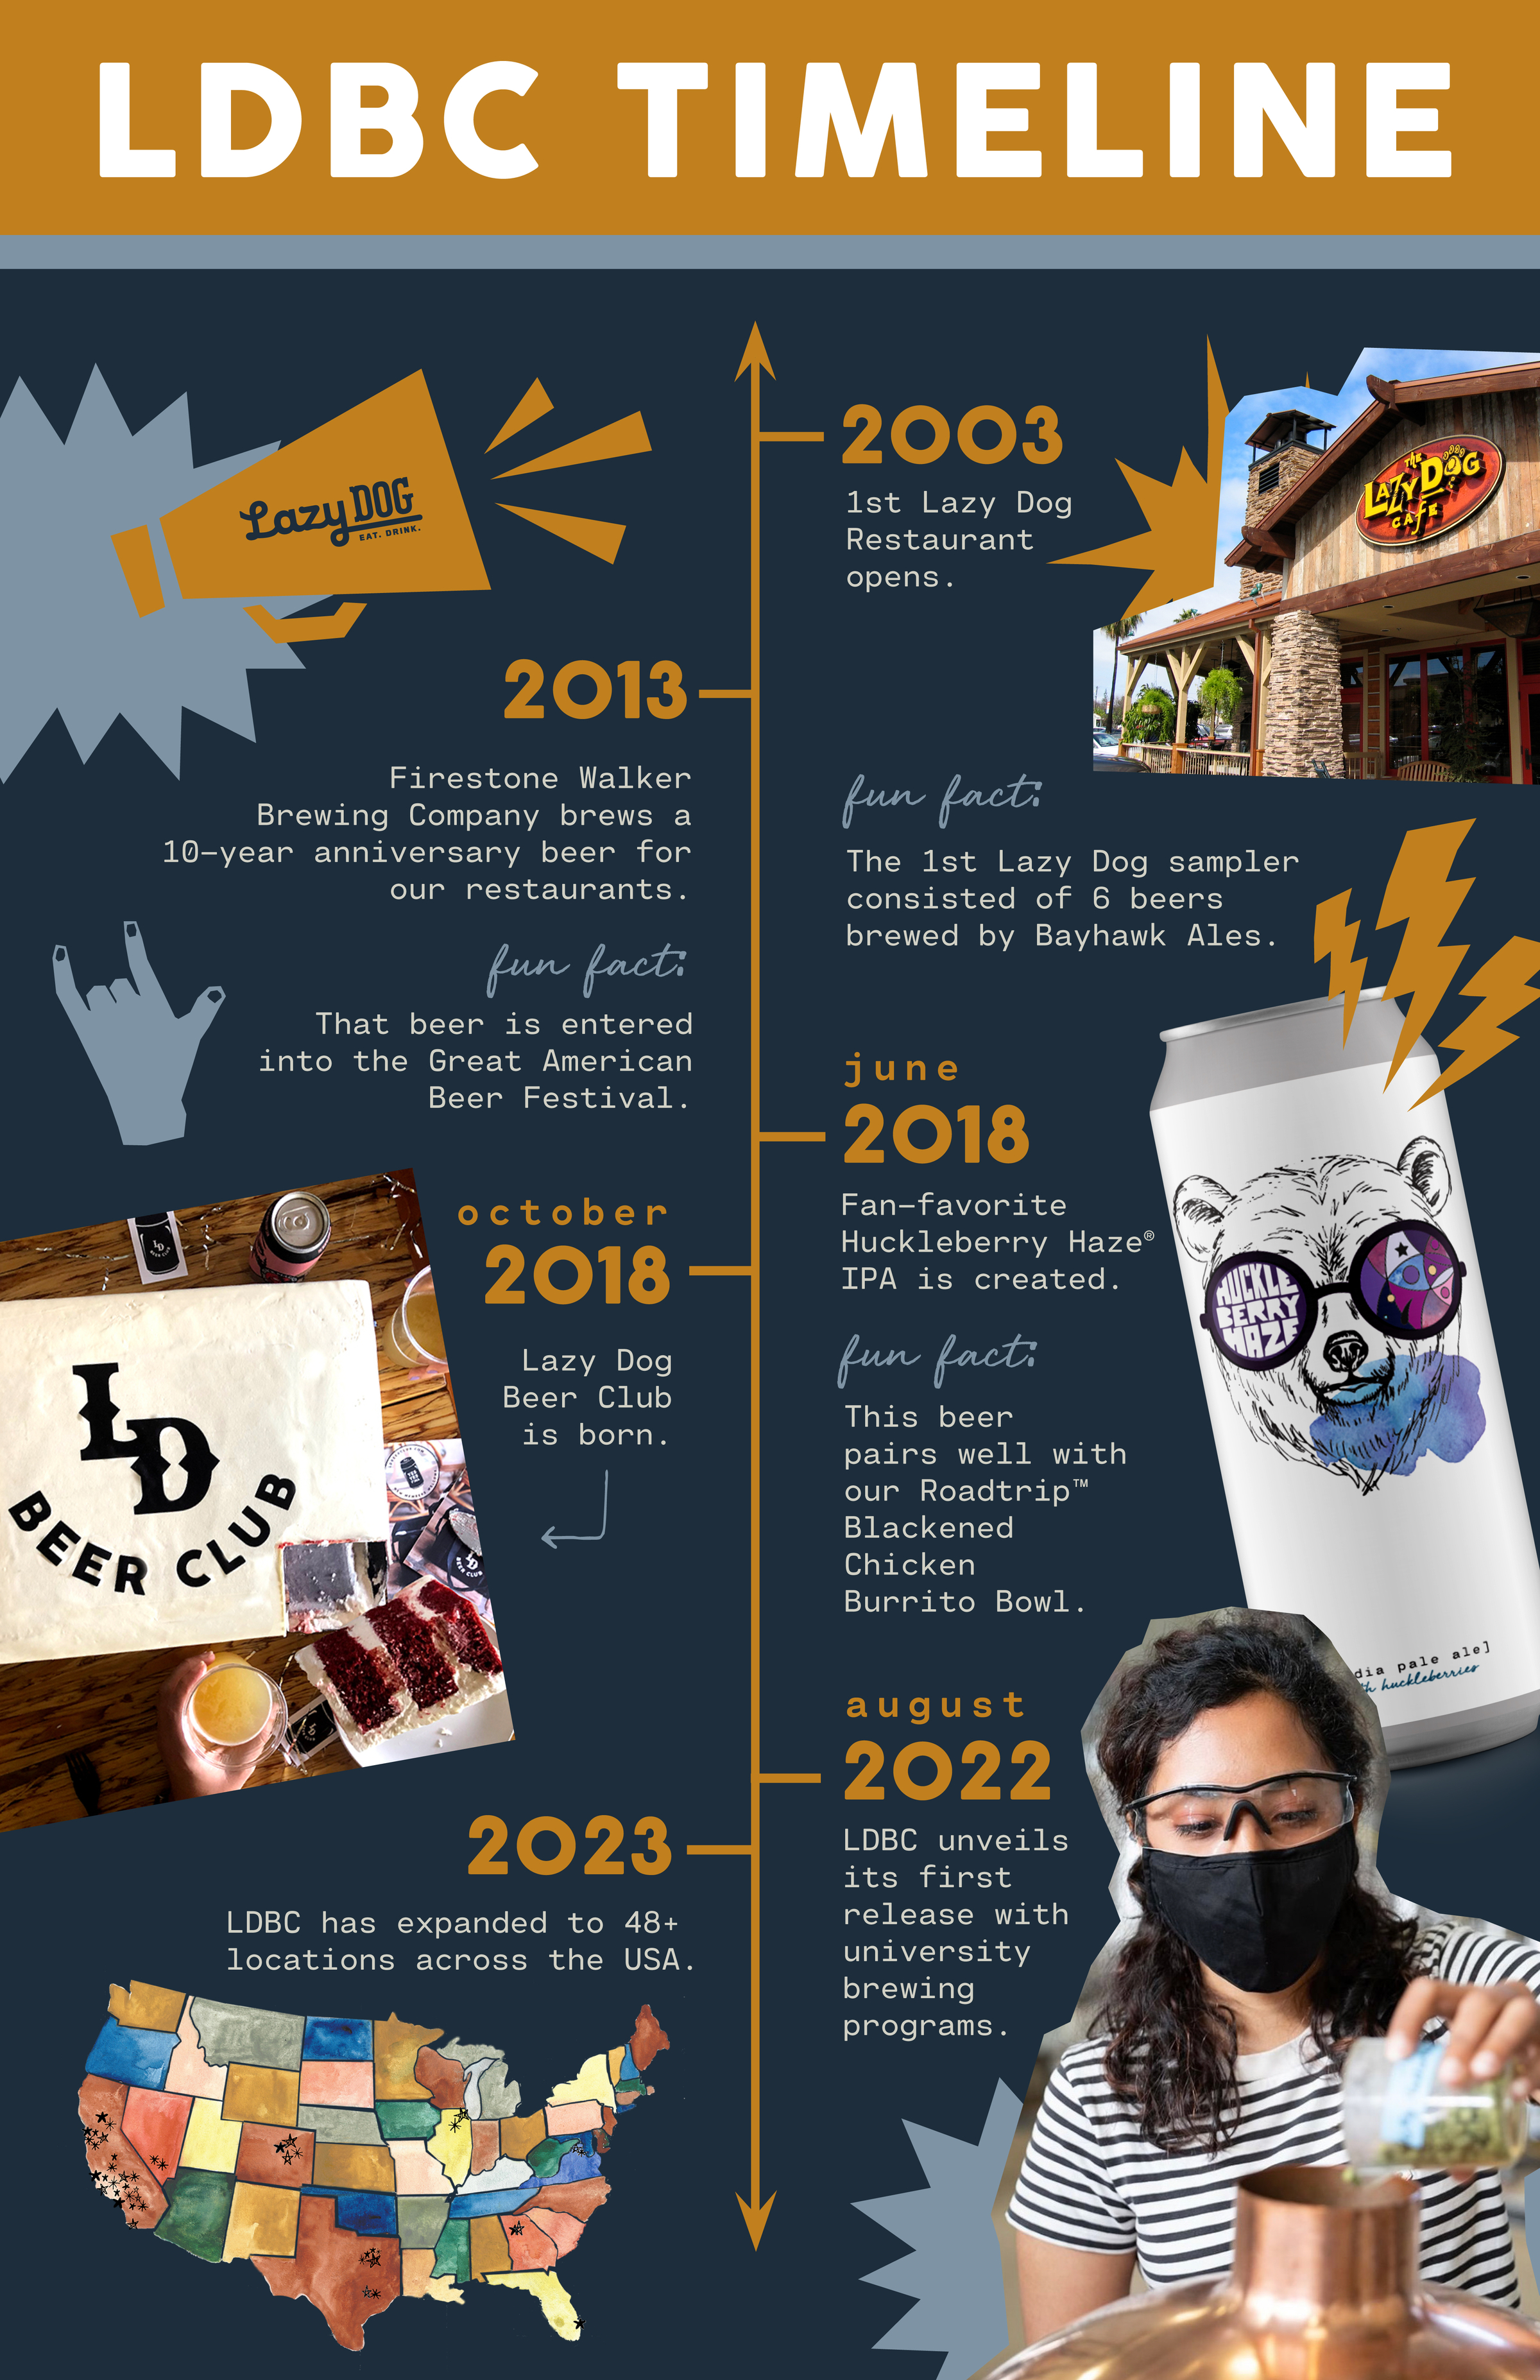 Timeline of Lazy Dog Beer Club's History